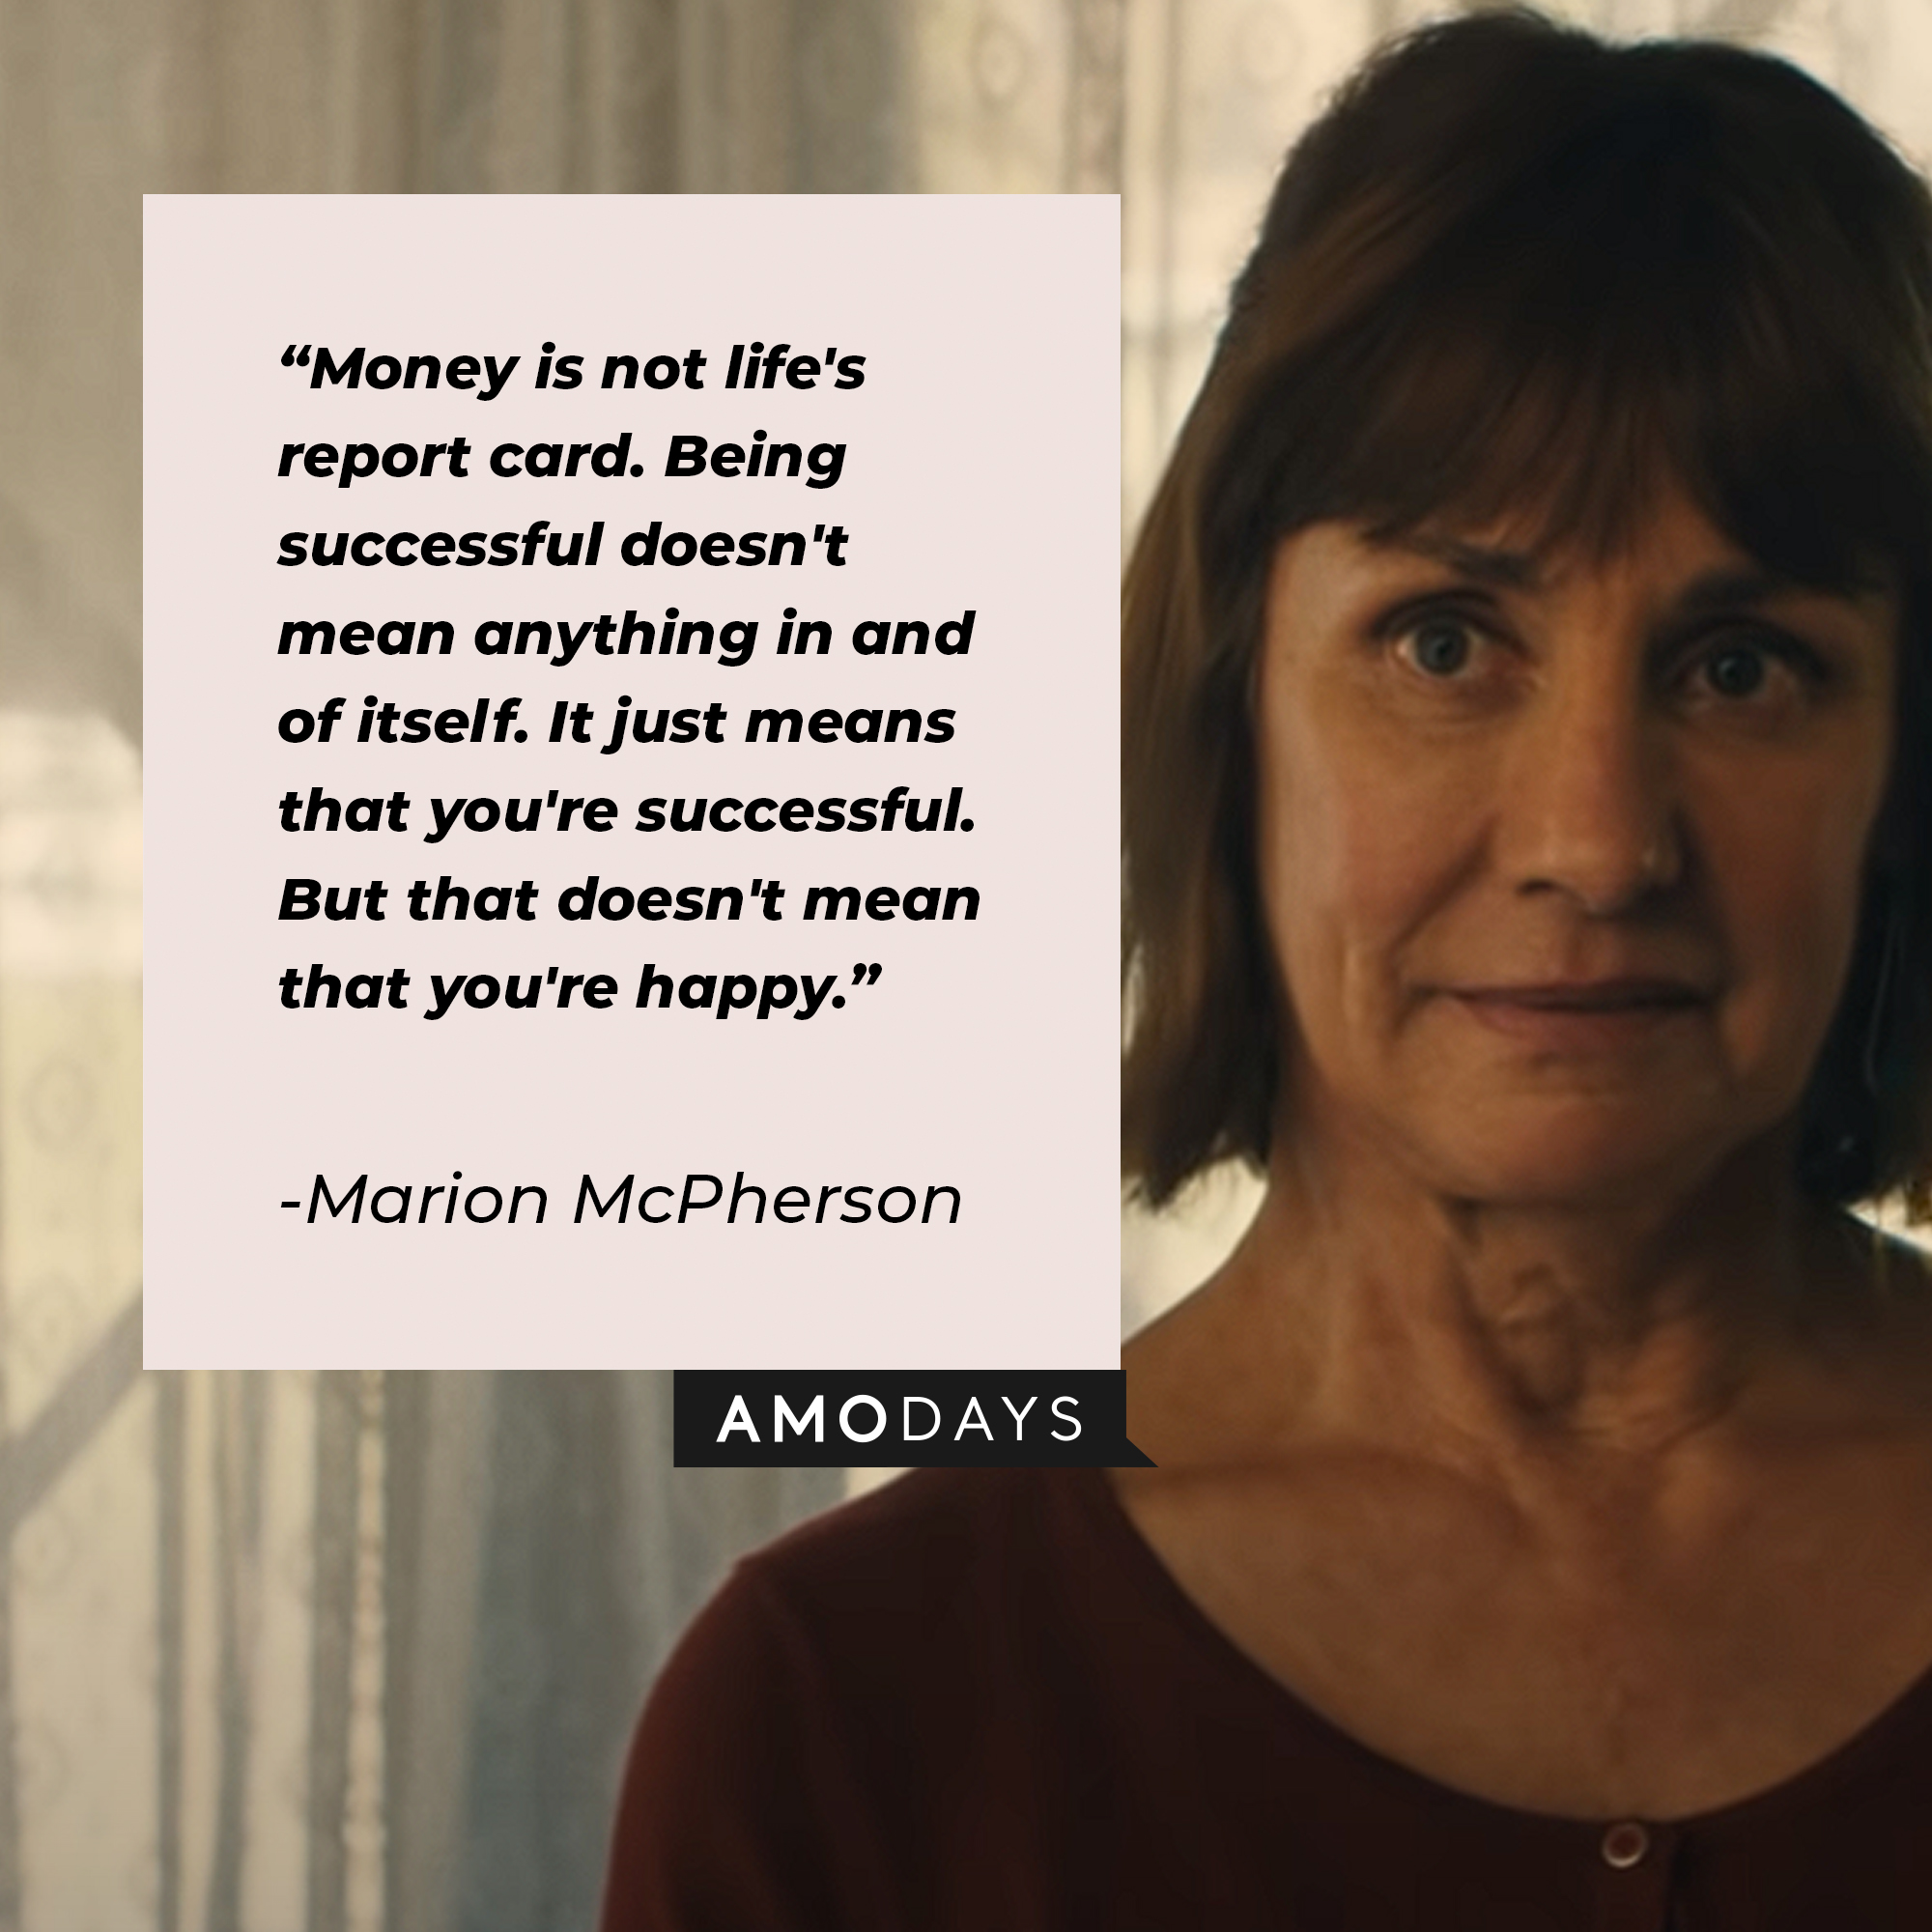 Marion McPherson's quote: "Money is not life's report card. Being successful doesn't mean anything in and of itself. It just means that you're successful. But that doesn't mean that you're happy." | Source: youtube.com/A24